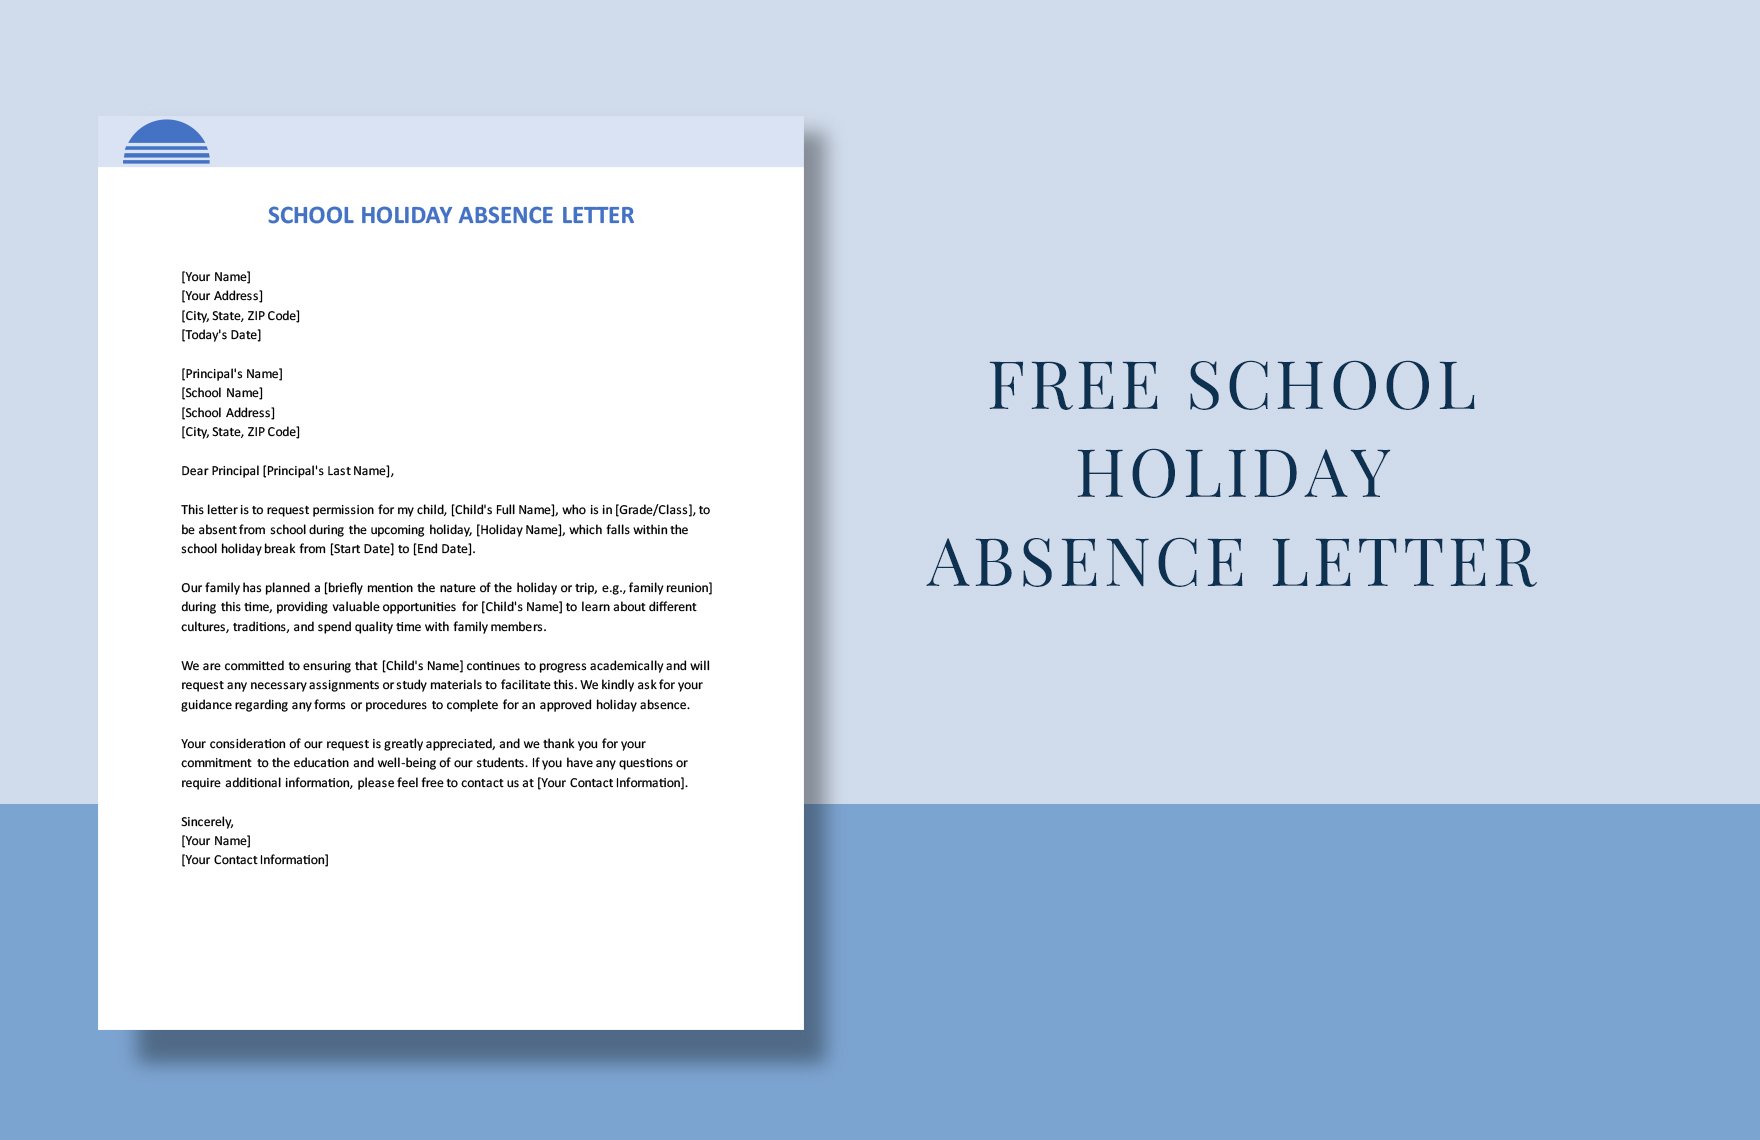 School Holiday Absence Letter